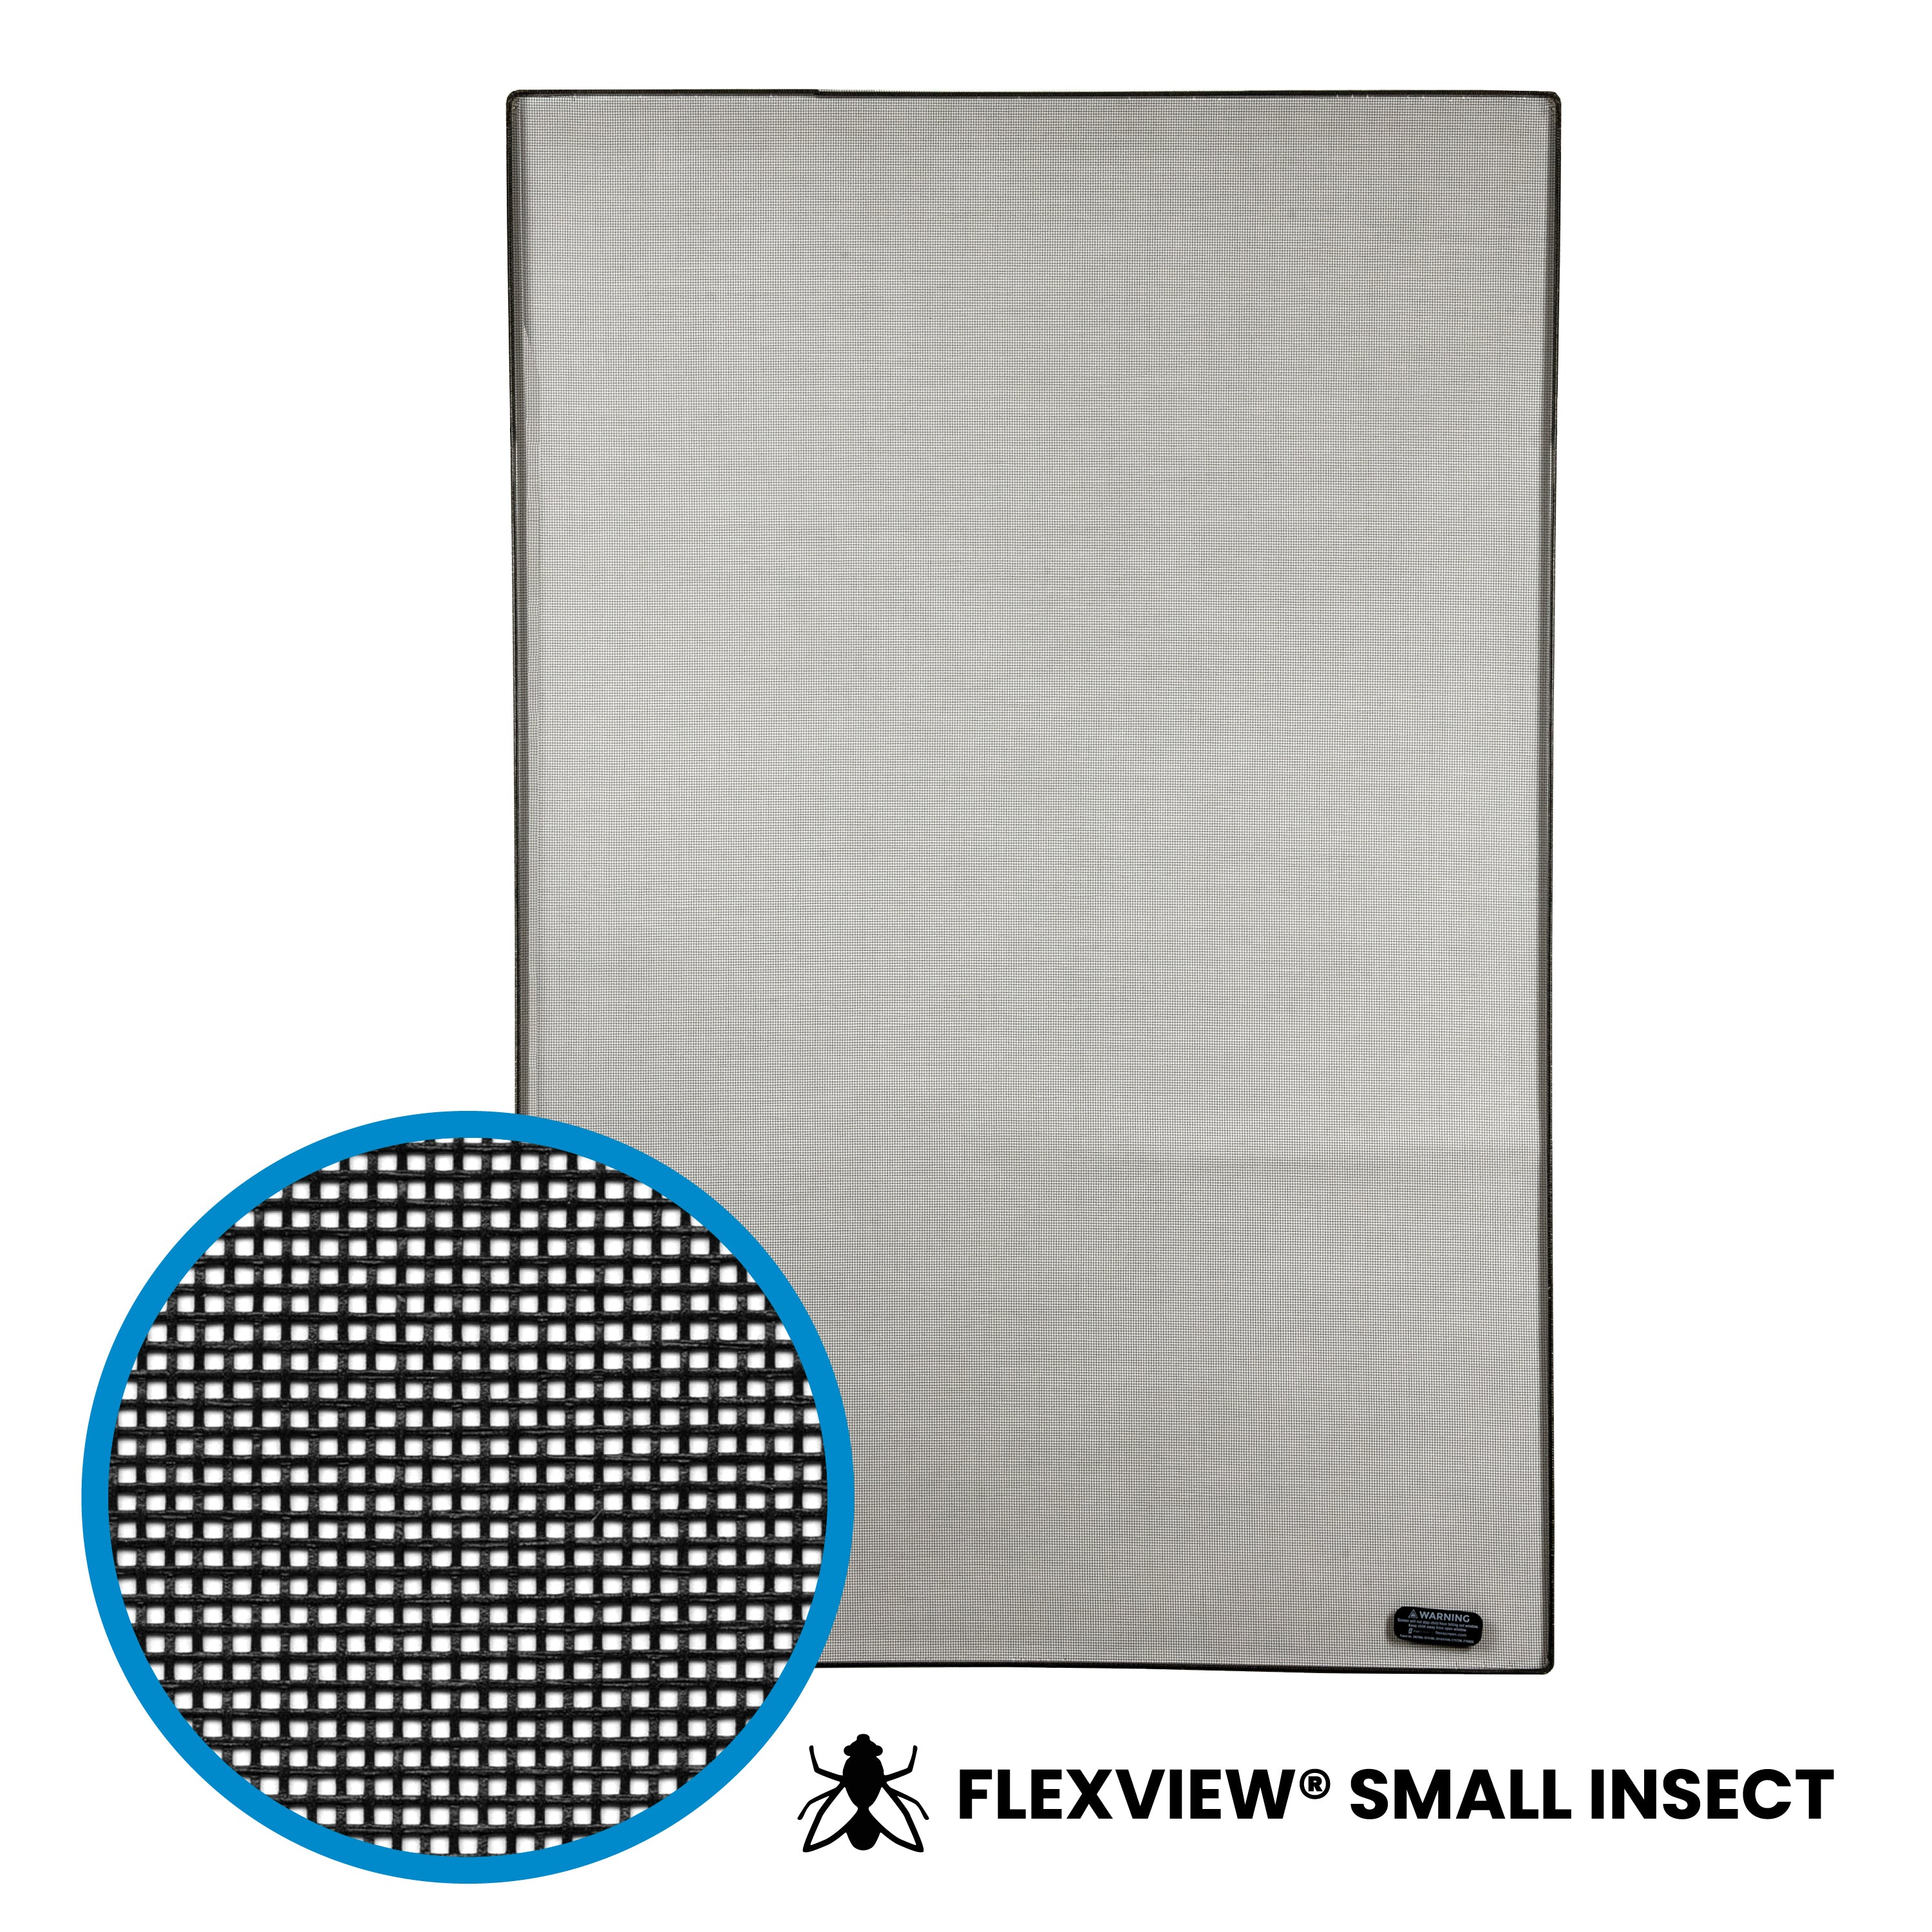 Pull down window fly screen - Small